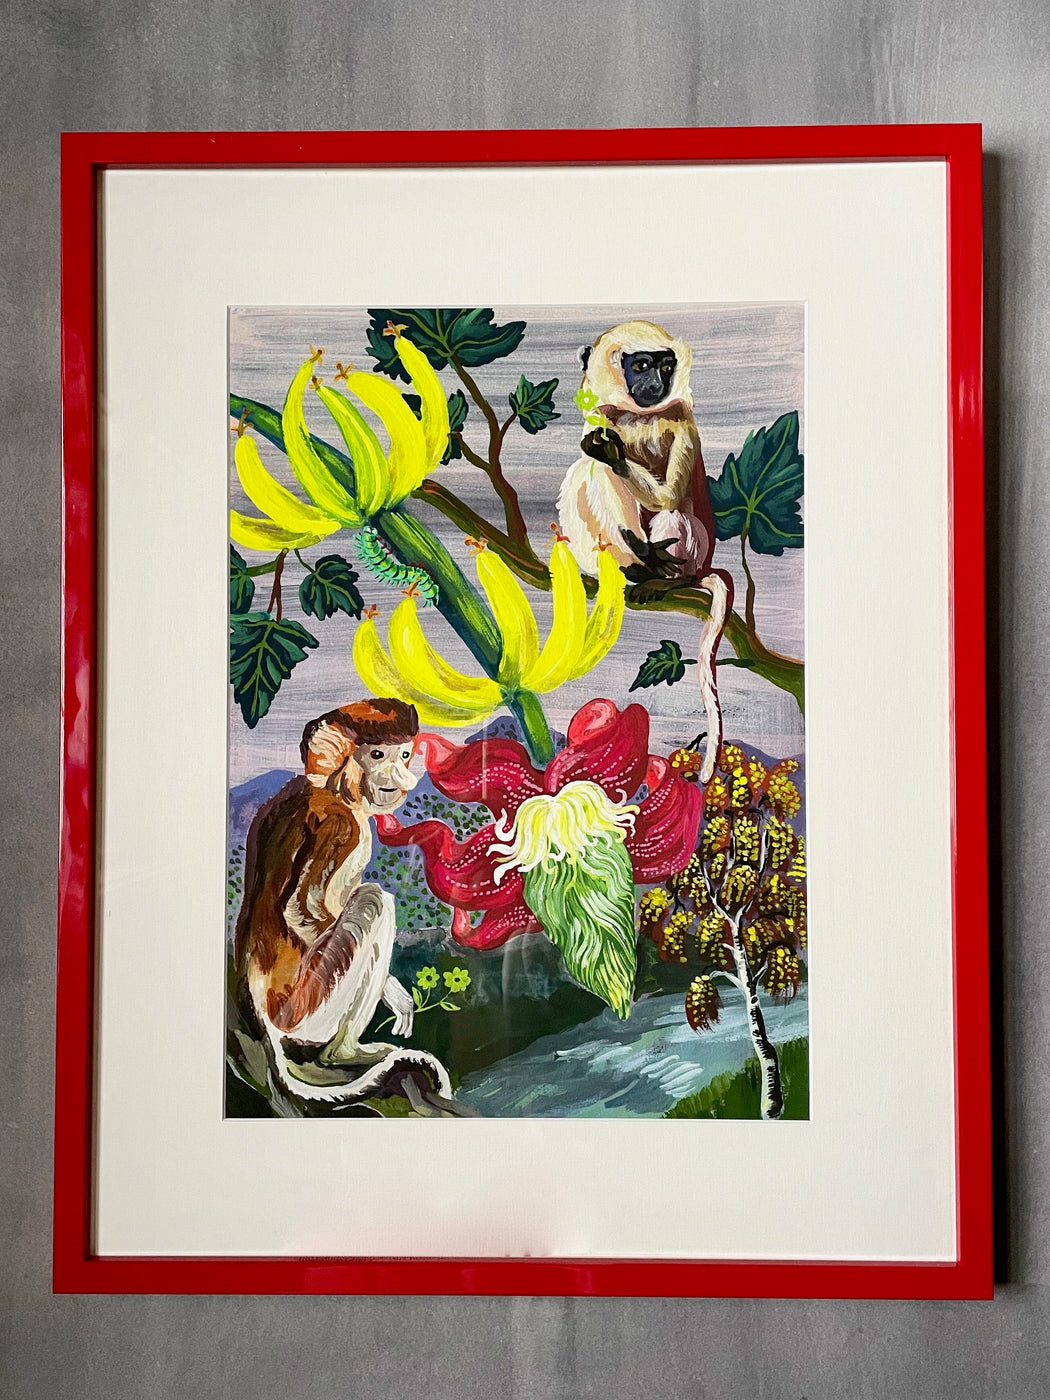 Nathalie Lete "In the Banana Tree" Limited Edition Print